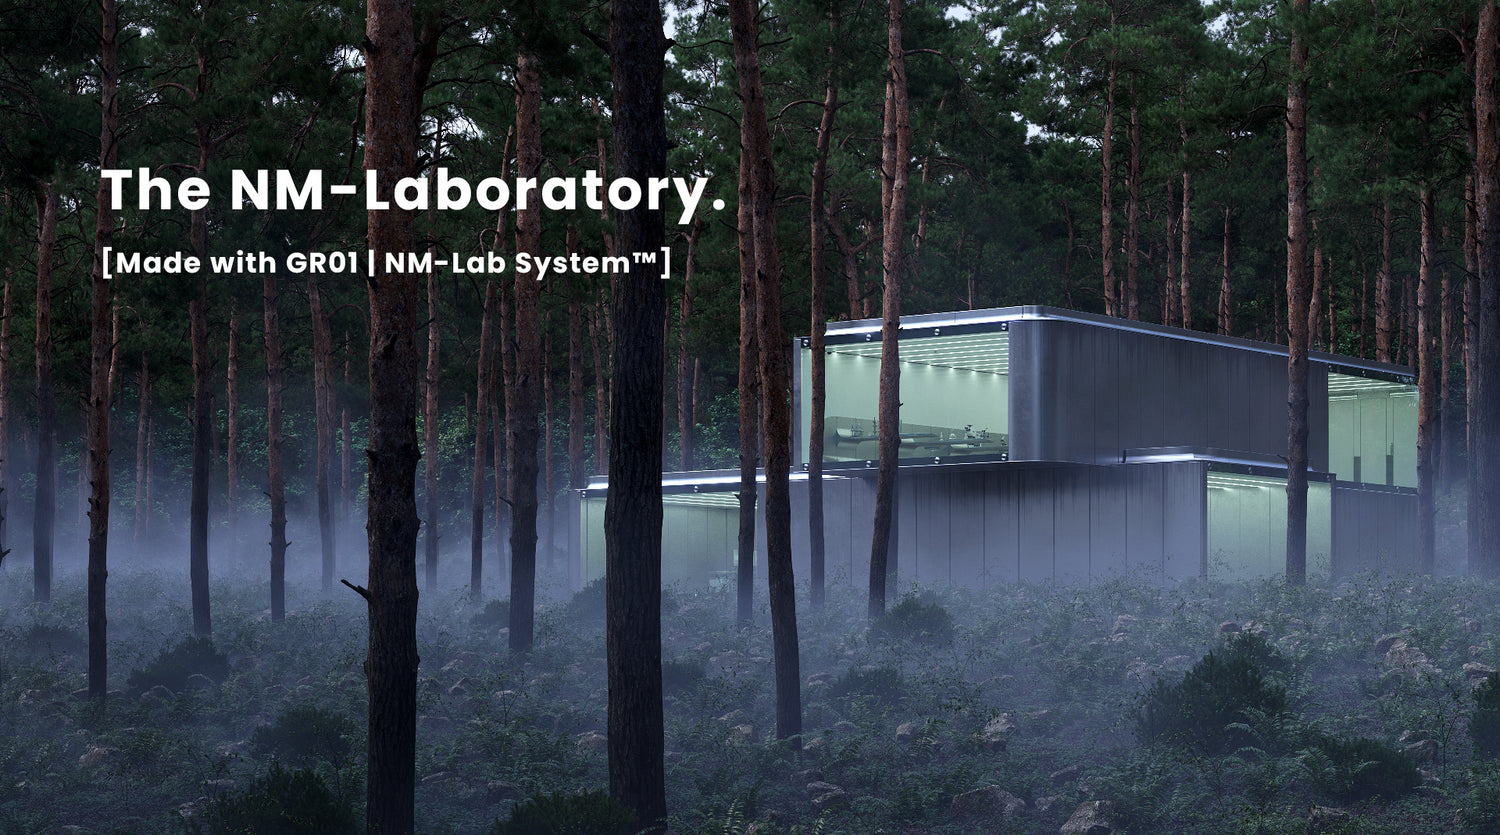 The NM-Laboratory (made with GR01 | NM-Lab System™)